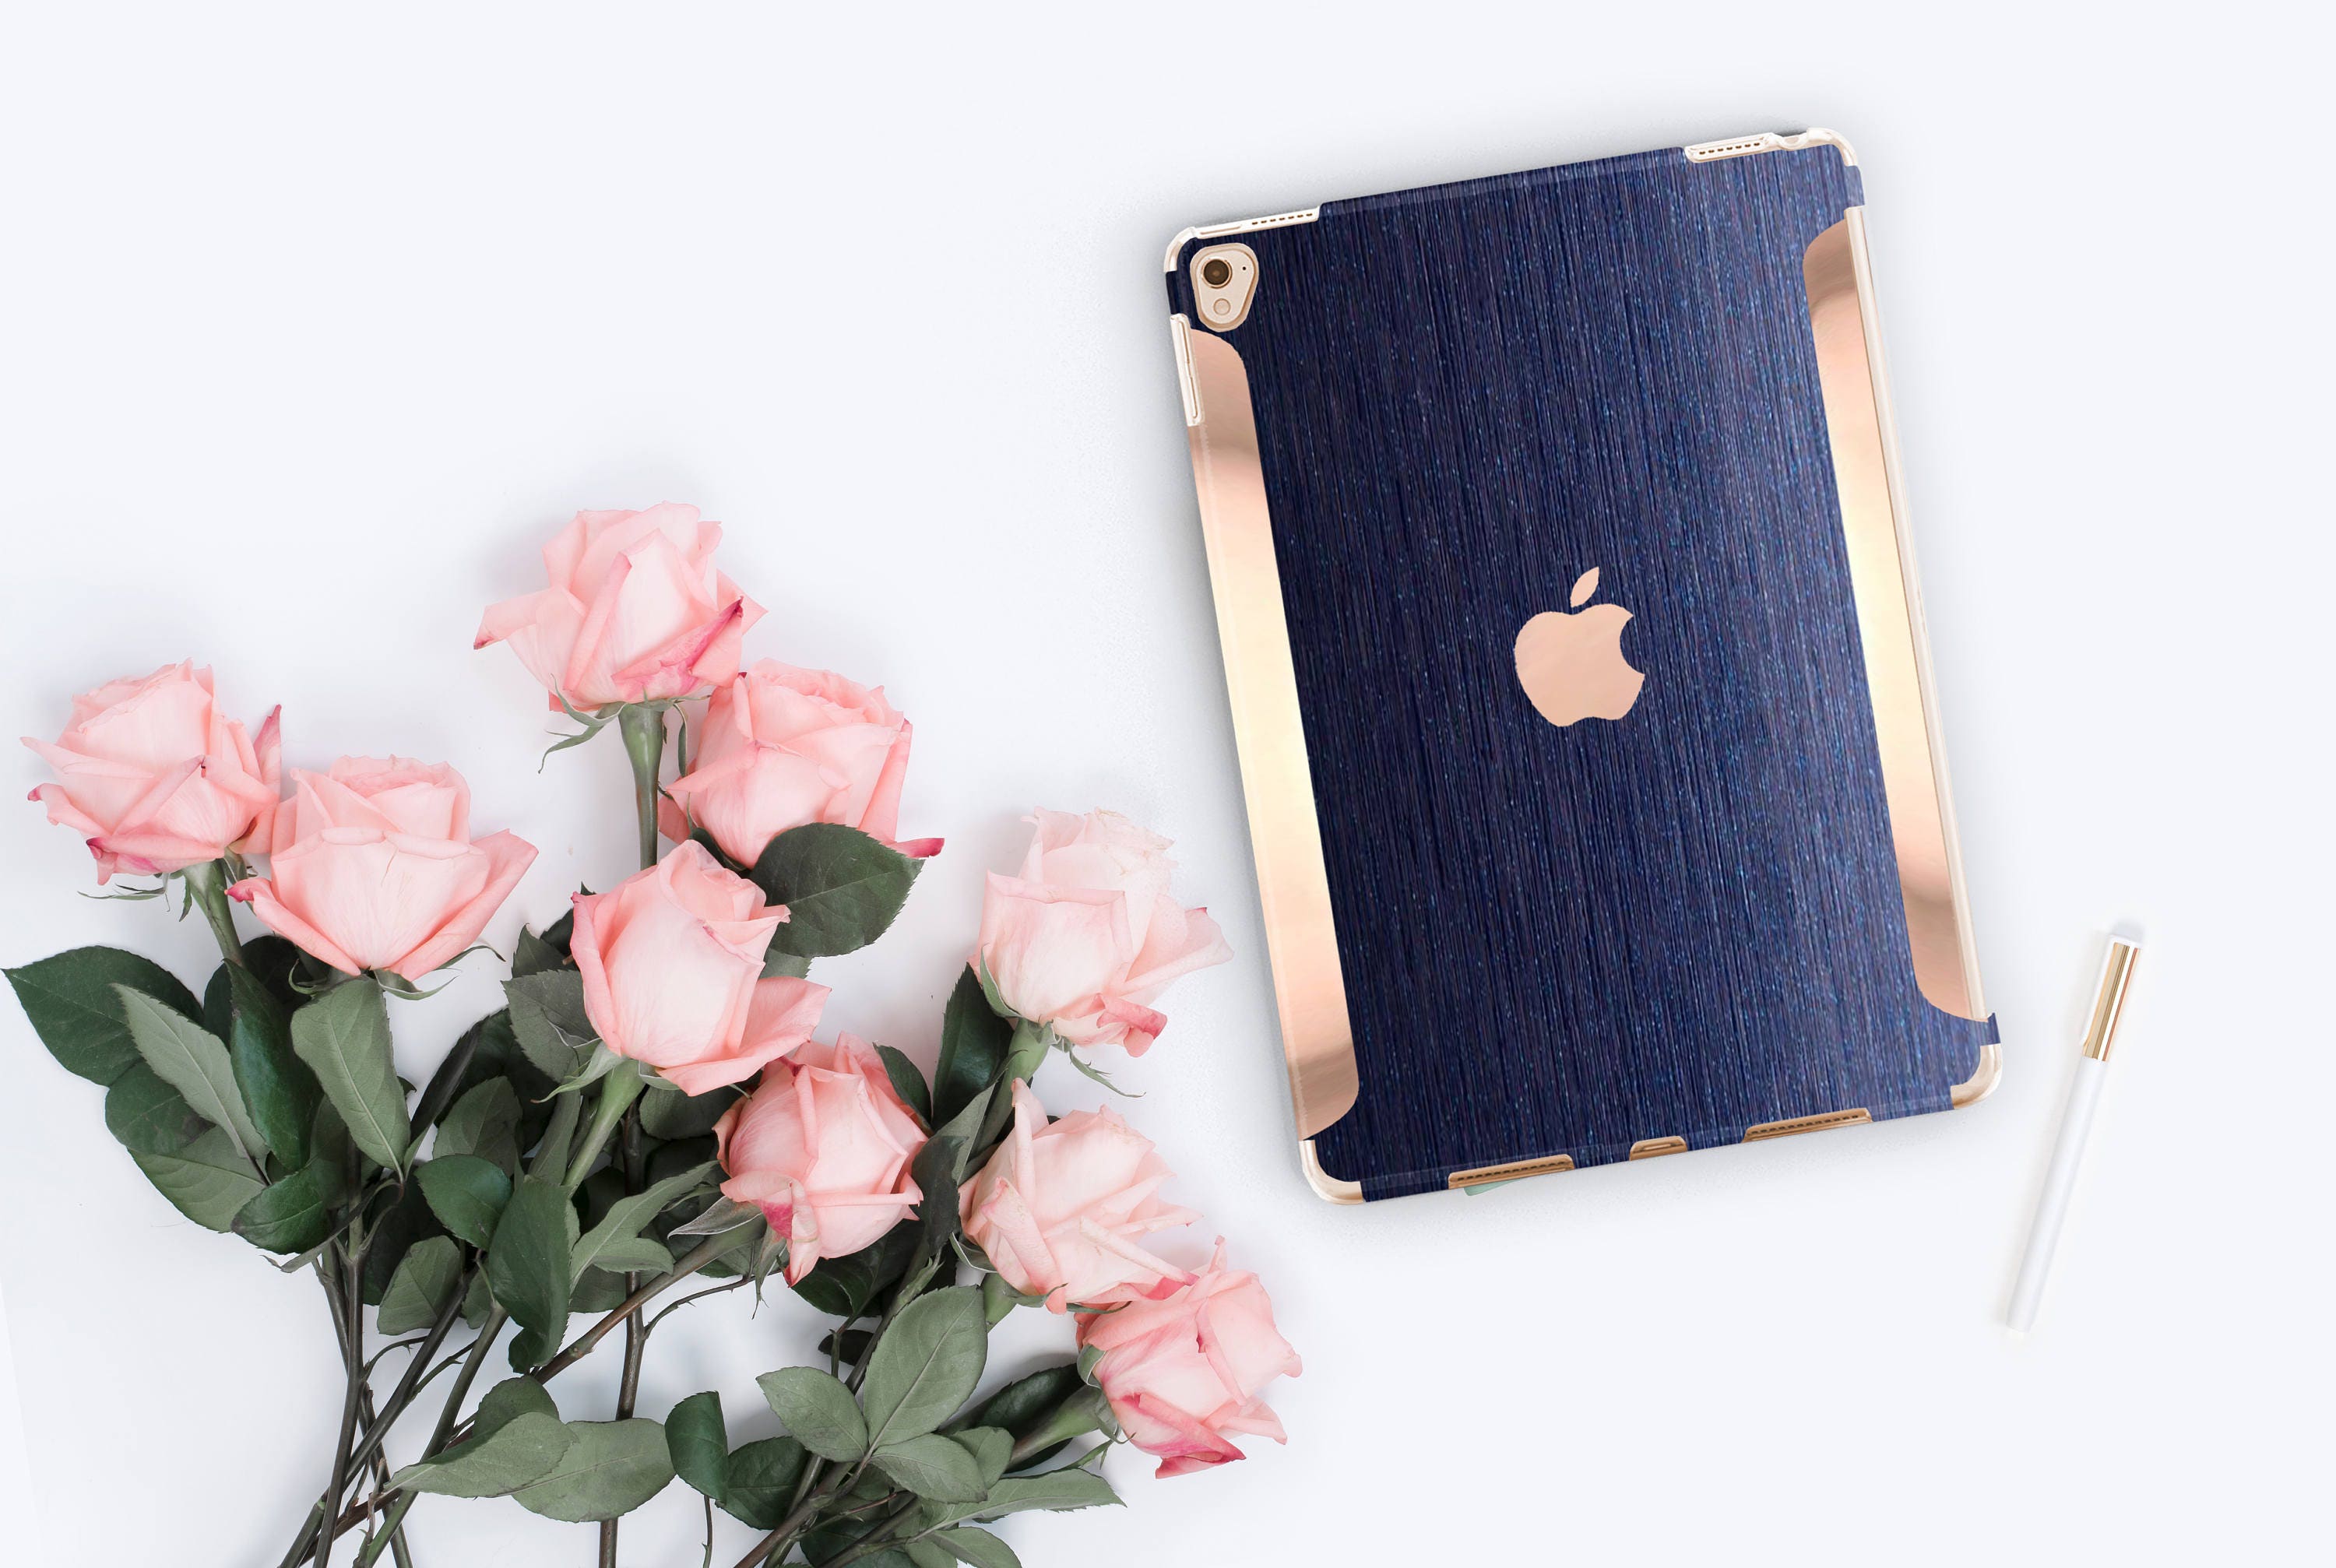 Ipad Case Brushed Blue With Rose Gold For The Smart Keyboard Compatible Hard Case Ipad Air 10 5 Ipad Mini 5 Ipad Pro 10 5